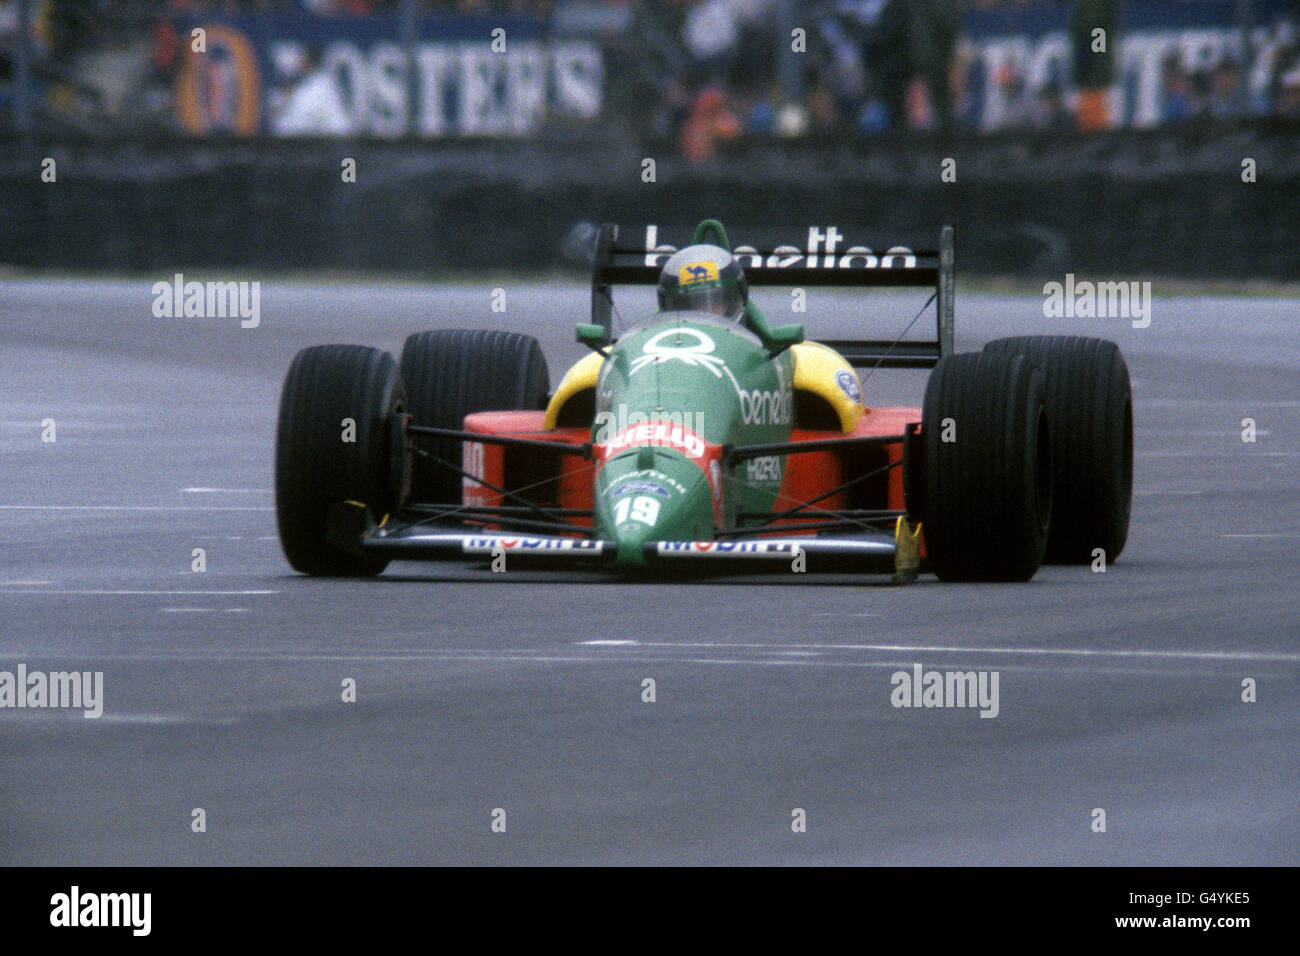 Alessandro Benetton High Resolution Stock Photography and Images - Alamy